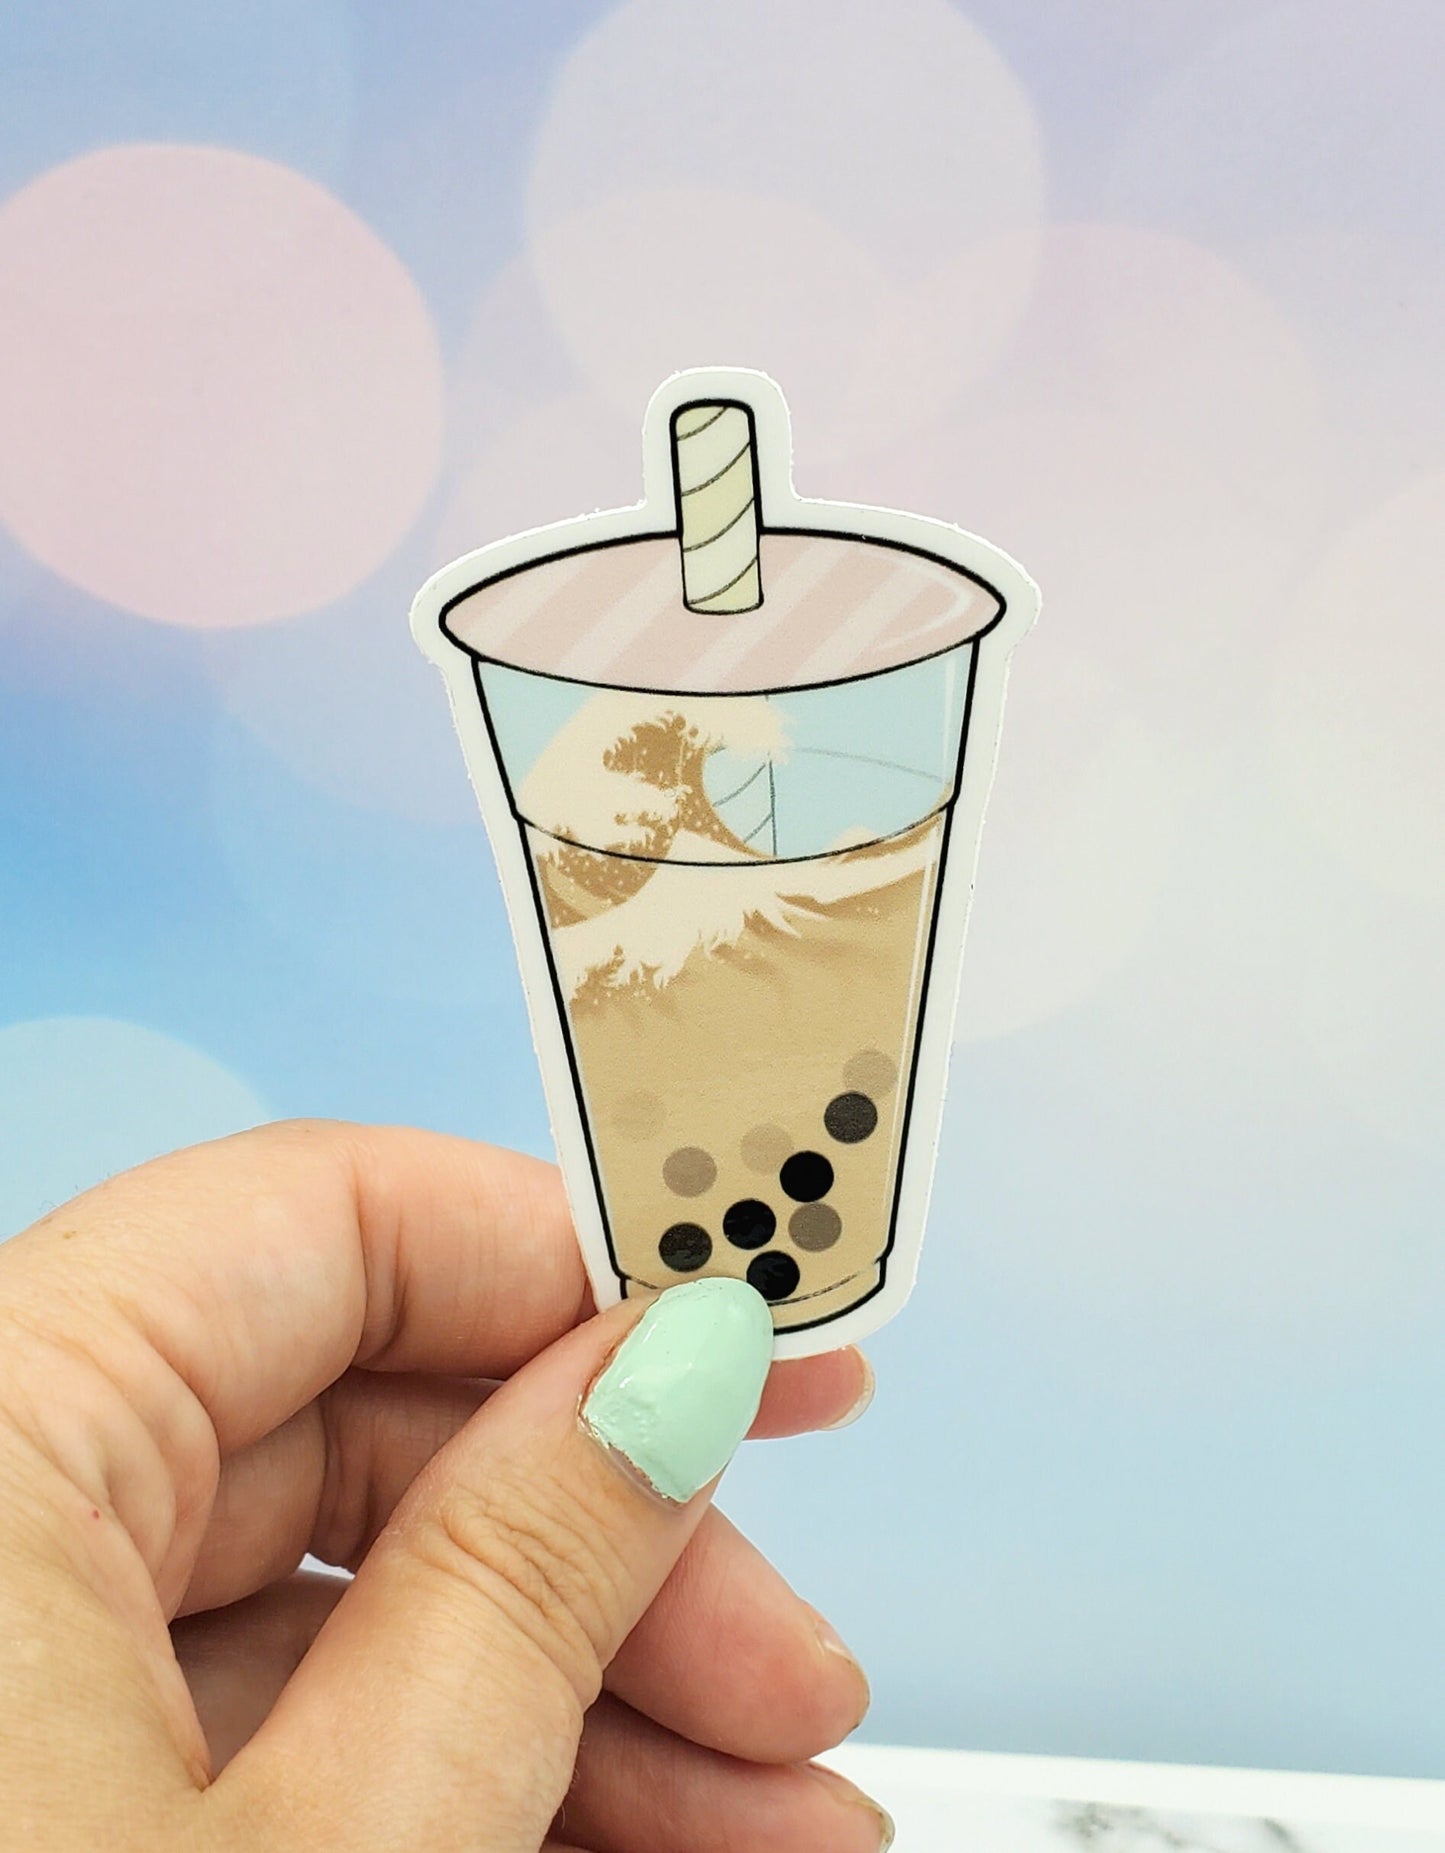 The Great Wave Boba Sticker